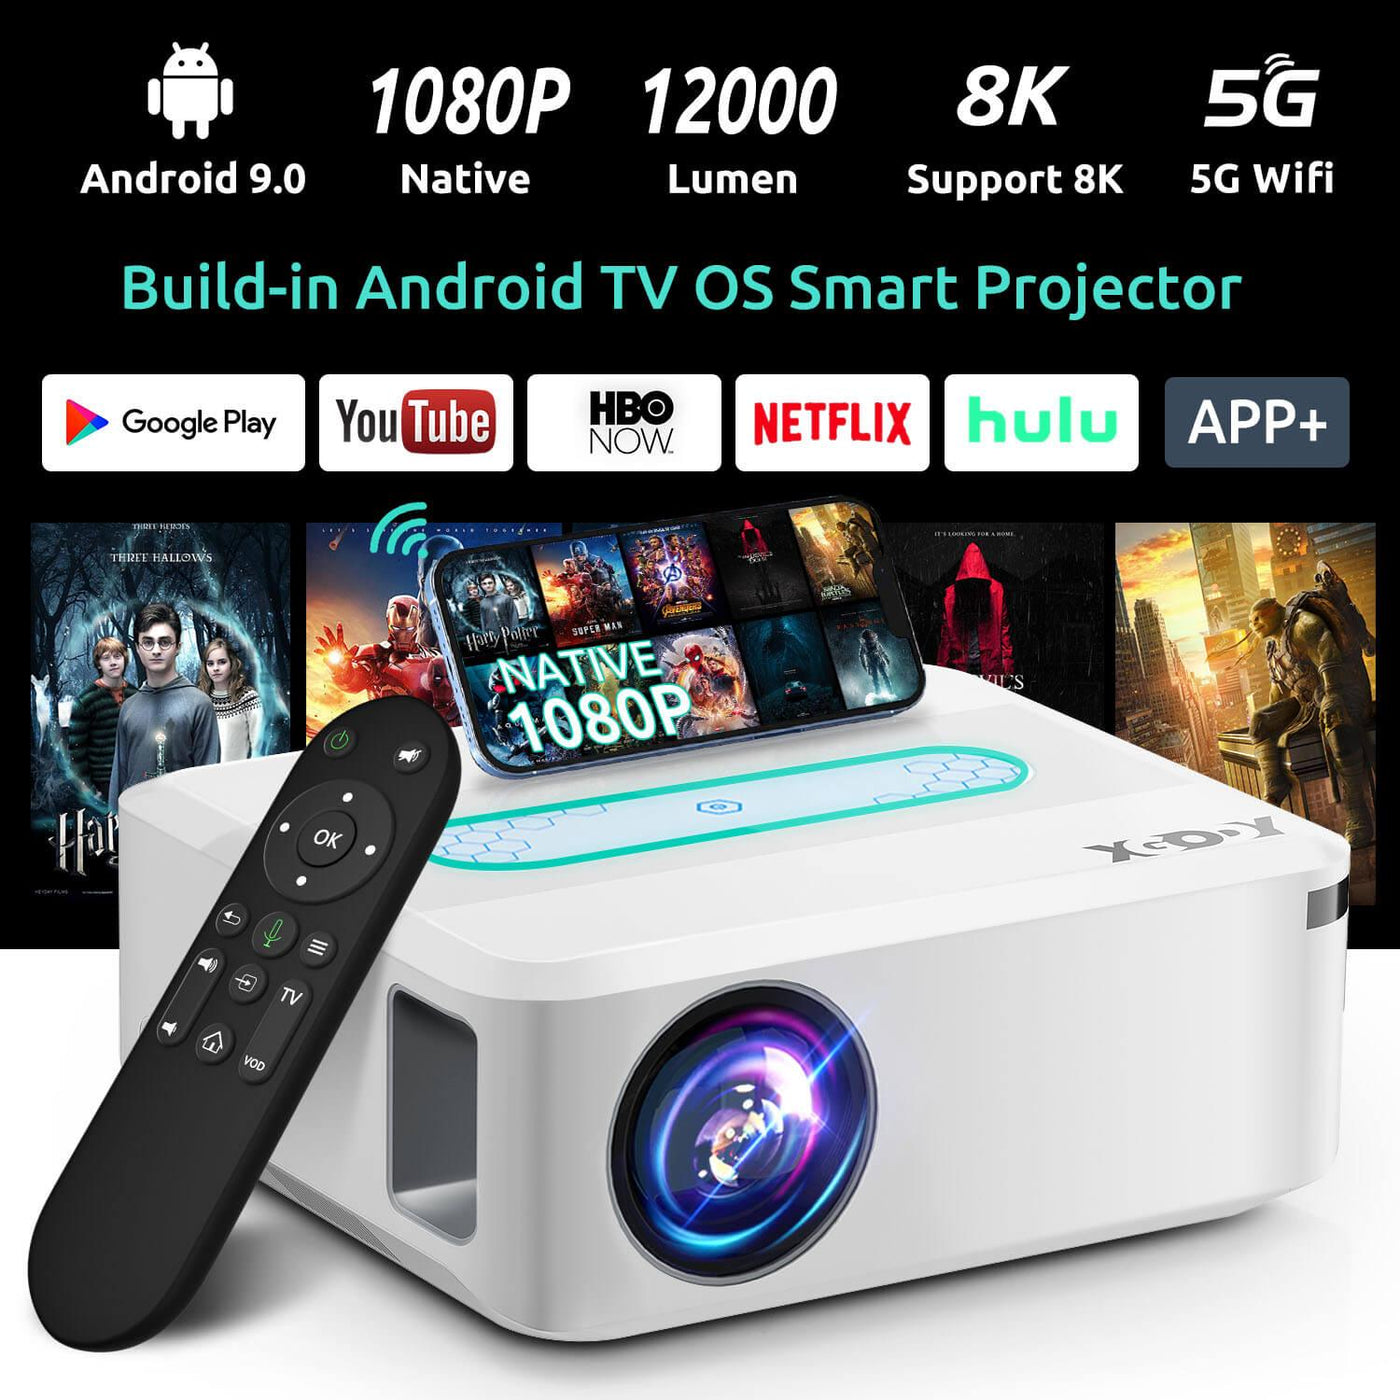 TOPTRO 2023 Upgraded X3 Native 1080P Projector Review – Pros & Cons